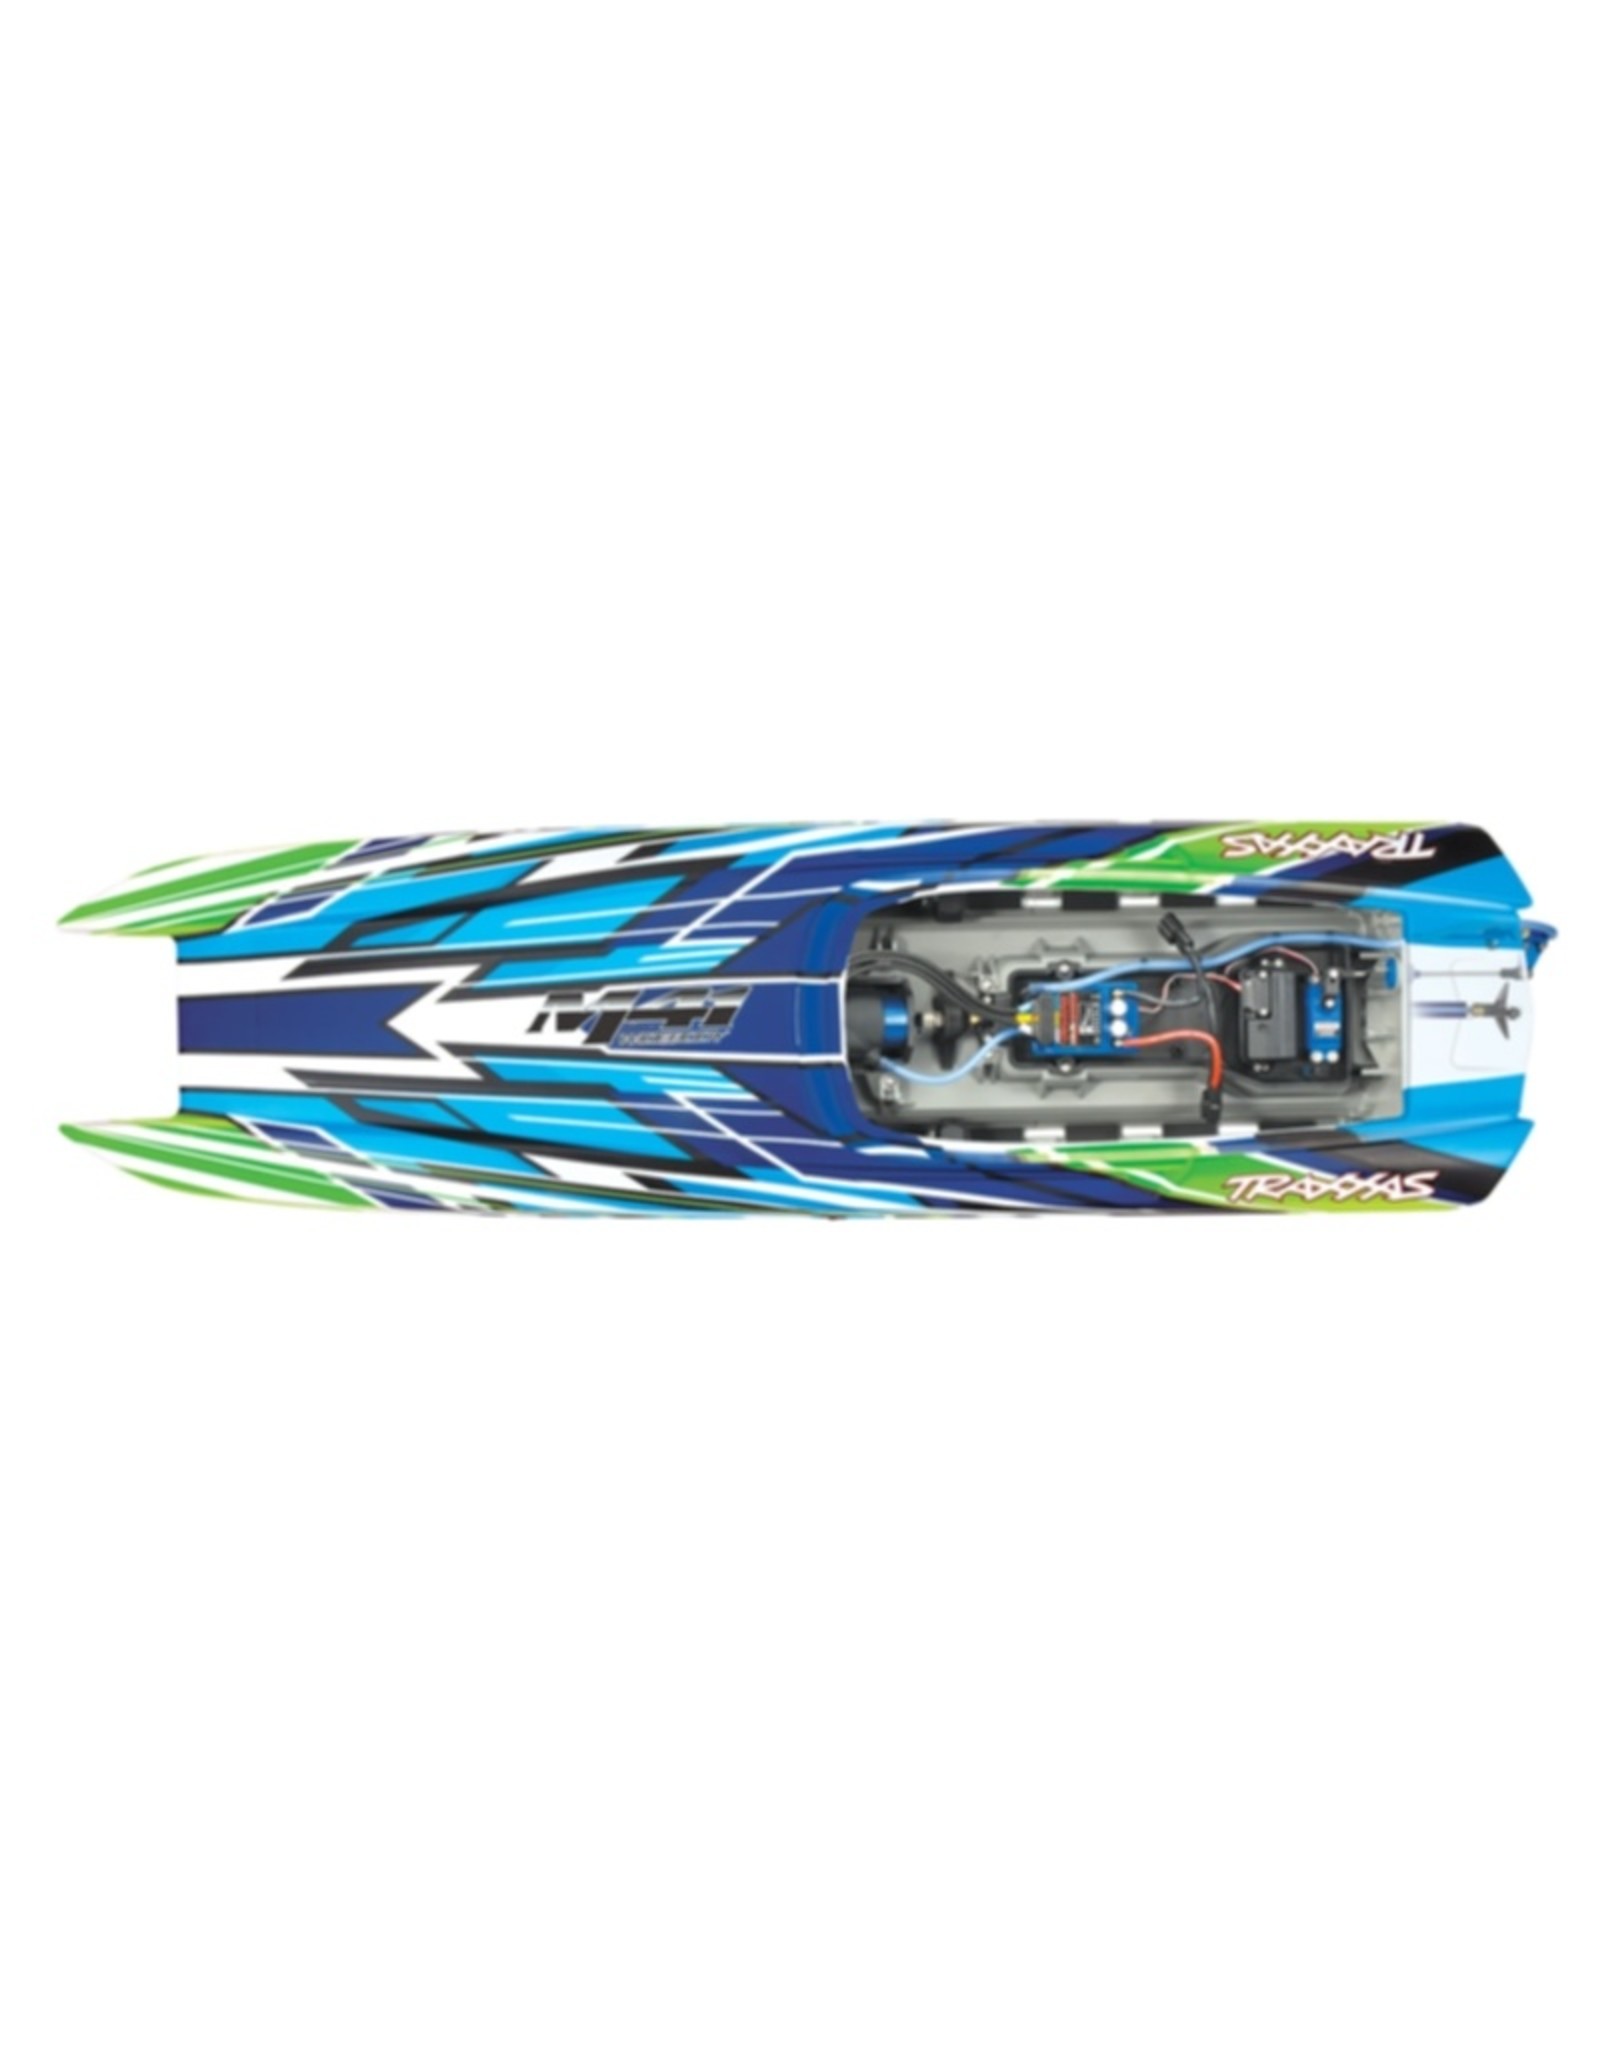 TRA TRA57046-4 Green  Fully assembled, Ready-To-Race® Catamaran, TQi™ 2.4GHz radio system, Traxxas Stability Management,™ Velineon® 540XL Brushless Motor, VXL-6s Marine ESC